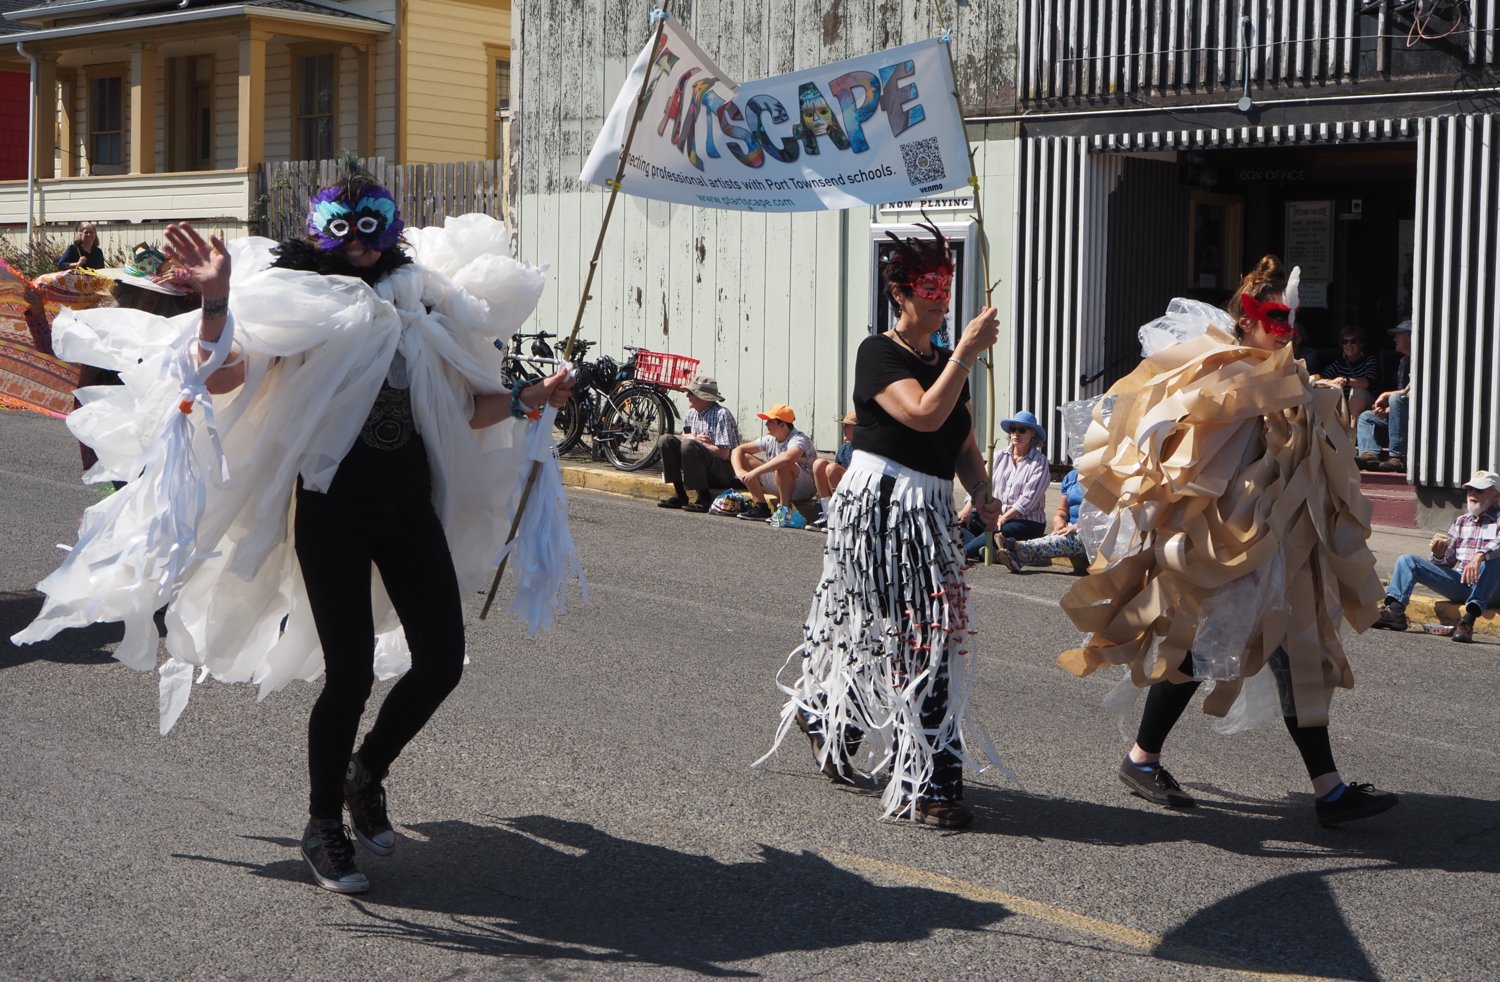 PT Artscape represented with funky fashions from repurposed materials in the parade while also hosting multiple art stations with opportunities for all ages to take part in weaving, painting, and sculpting.